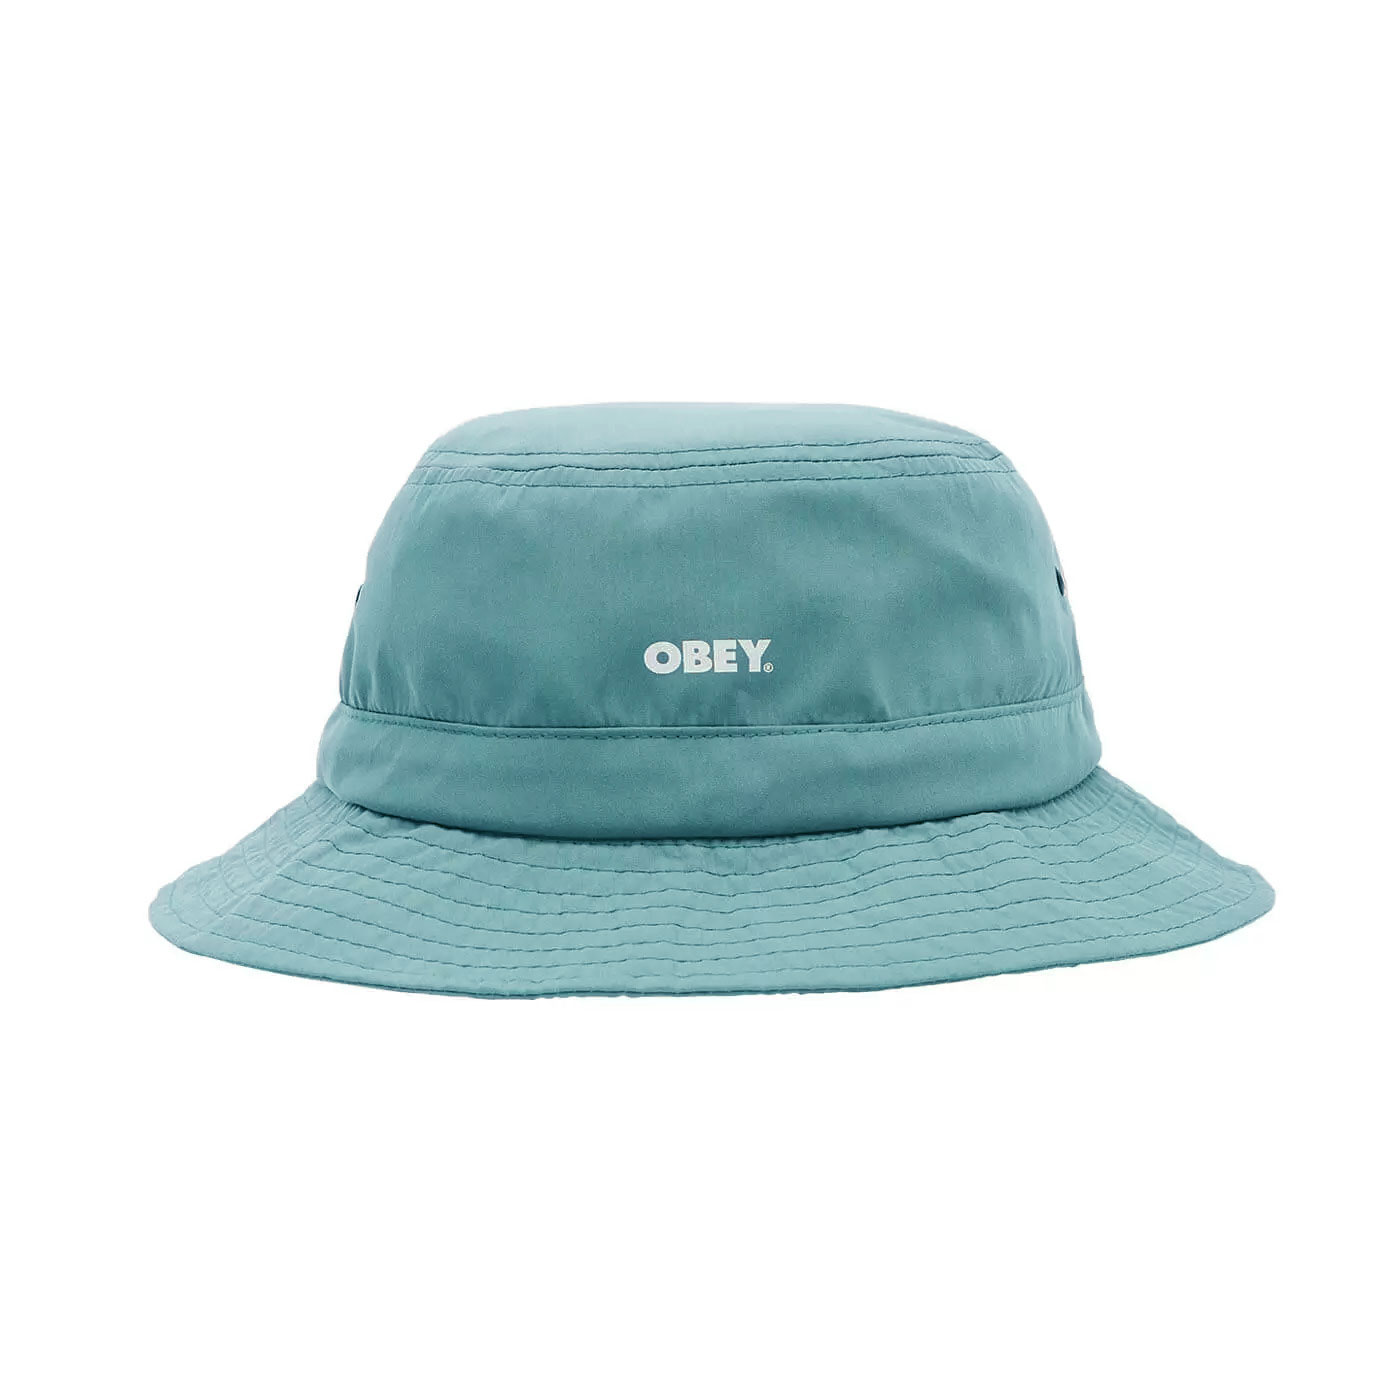 Obey Bold Century Bucket Hat - Turquoise